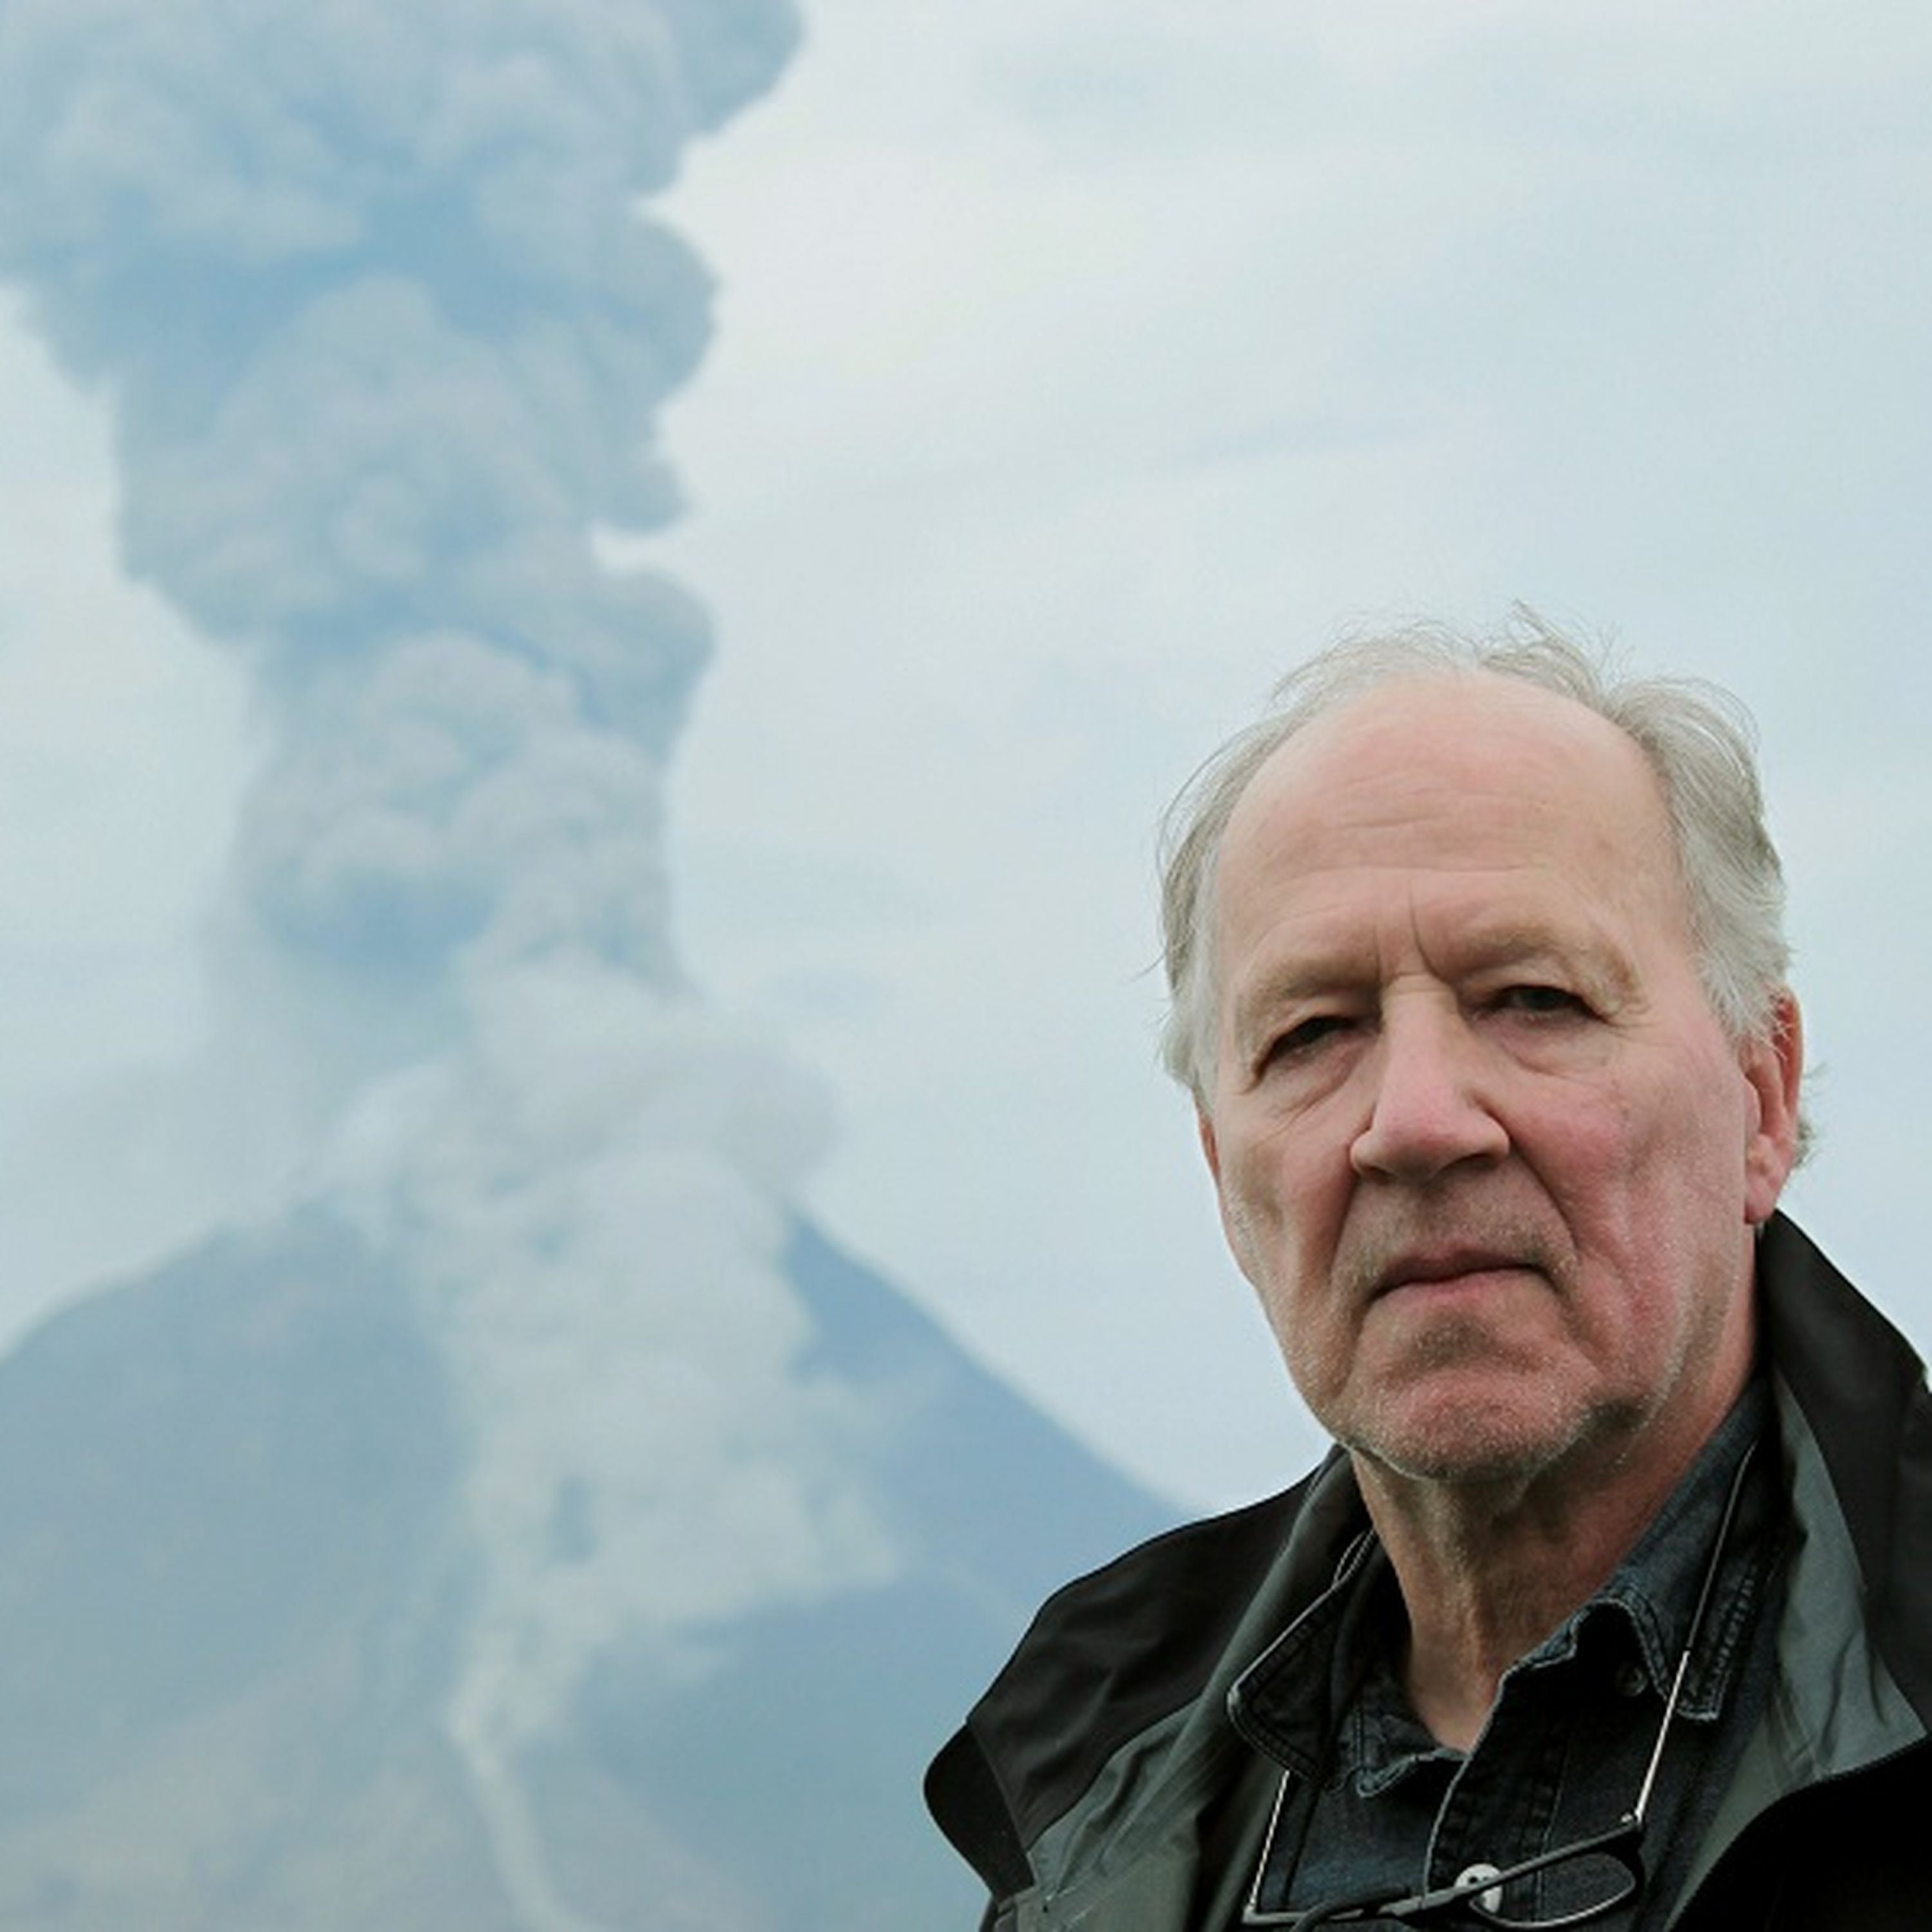 Werner Herzog On Science, Language, Mars, and His Volcano Fever Dreams